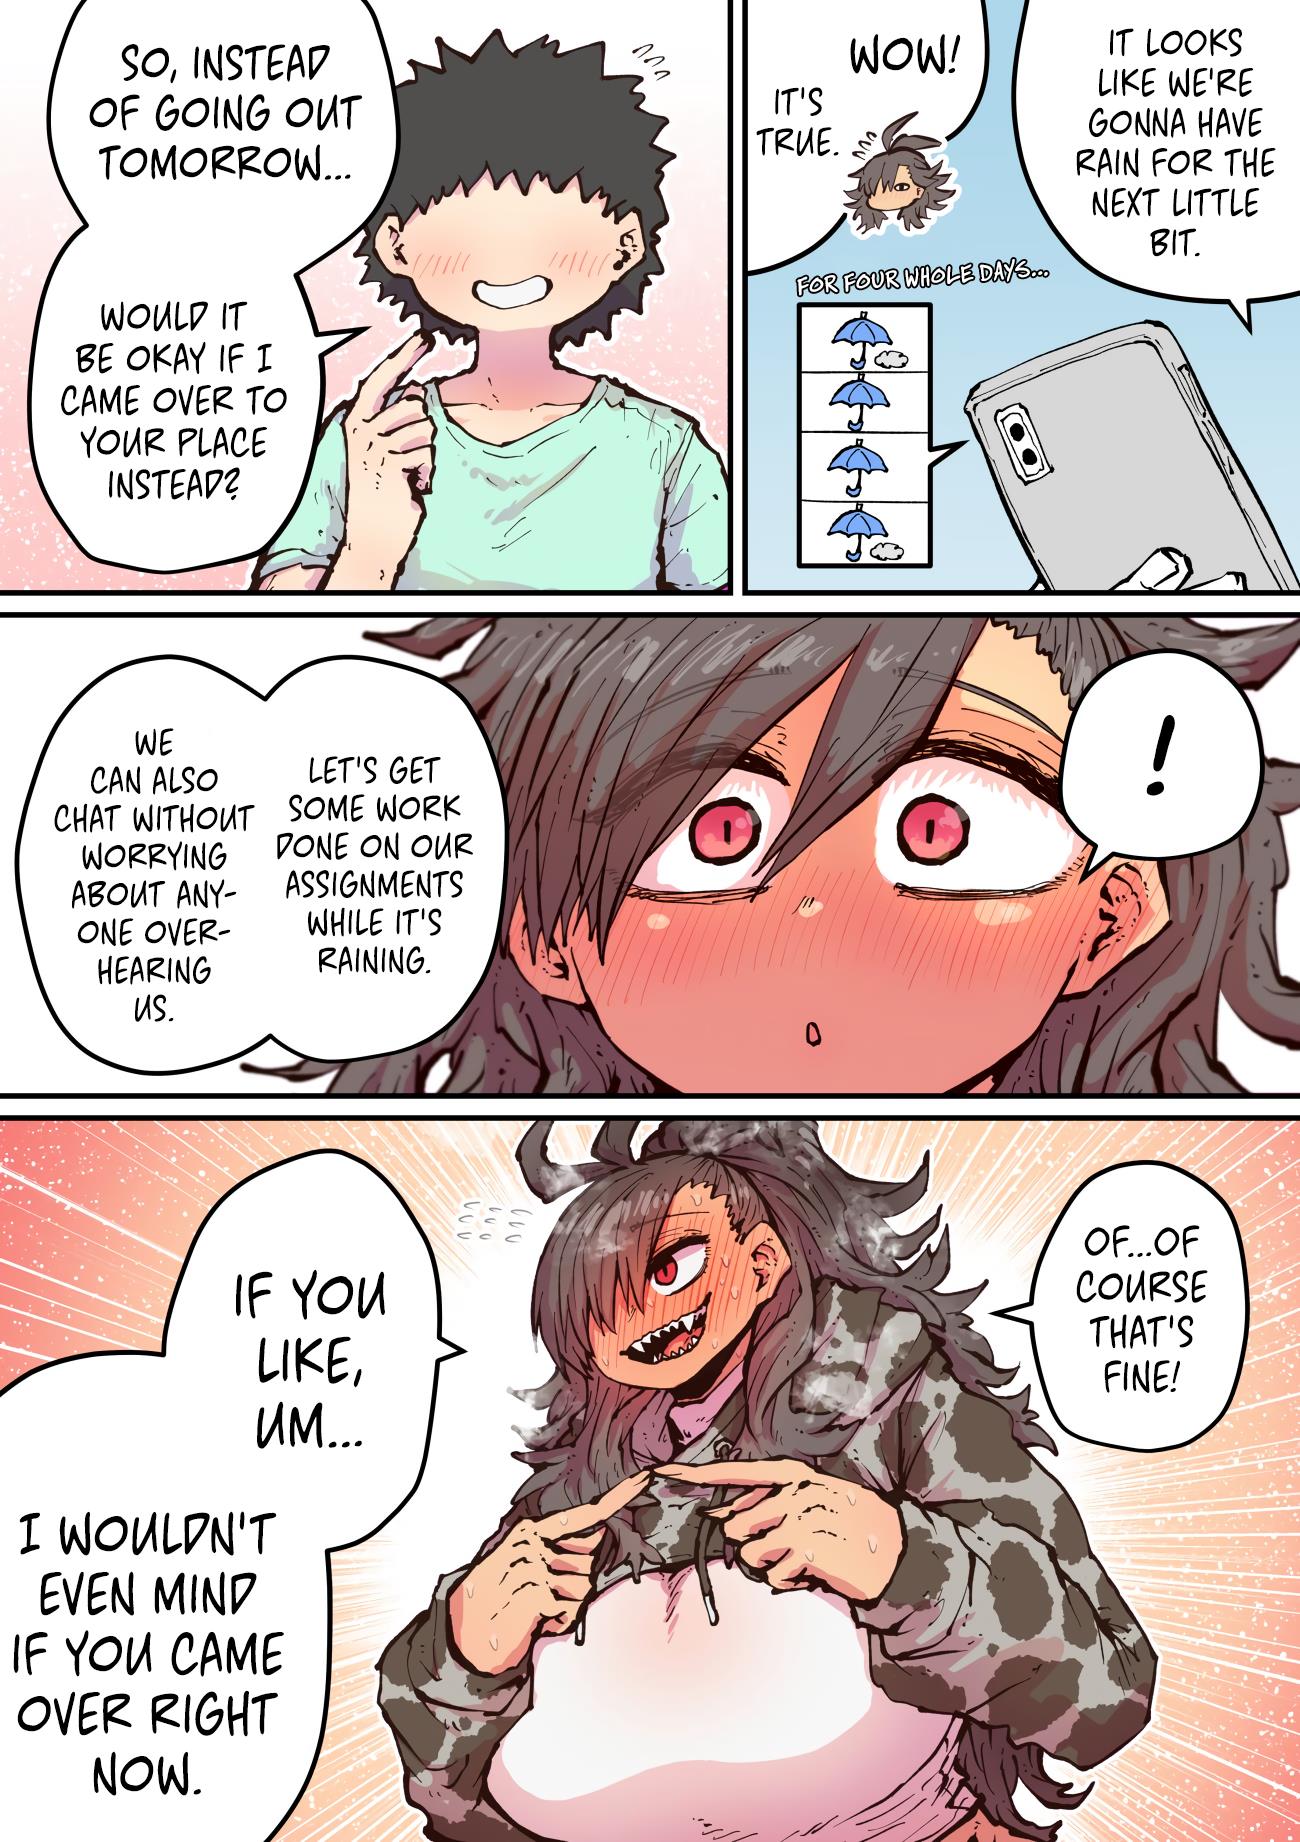 Being Targeted By Hyena-Chan - Page 3